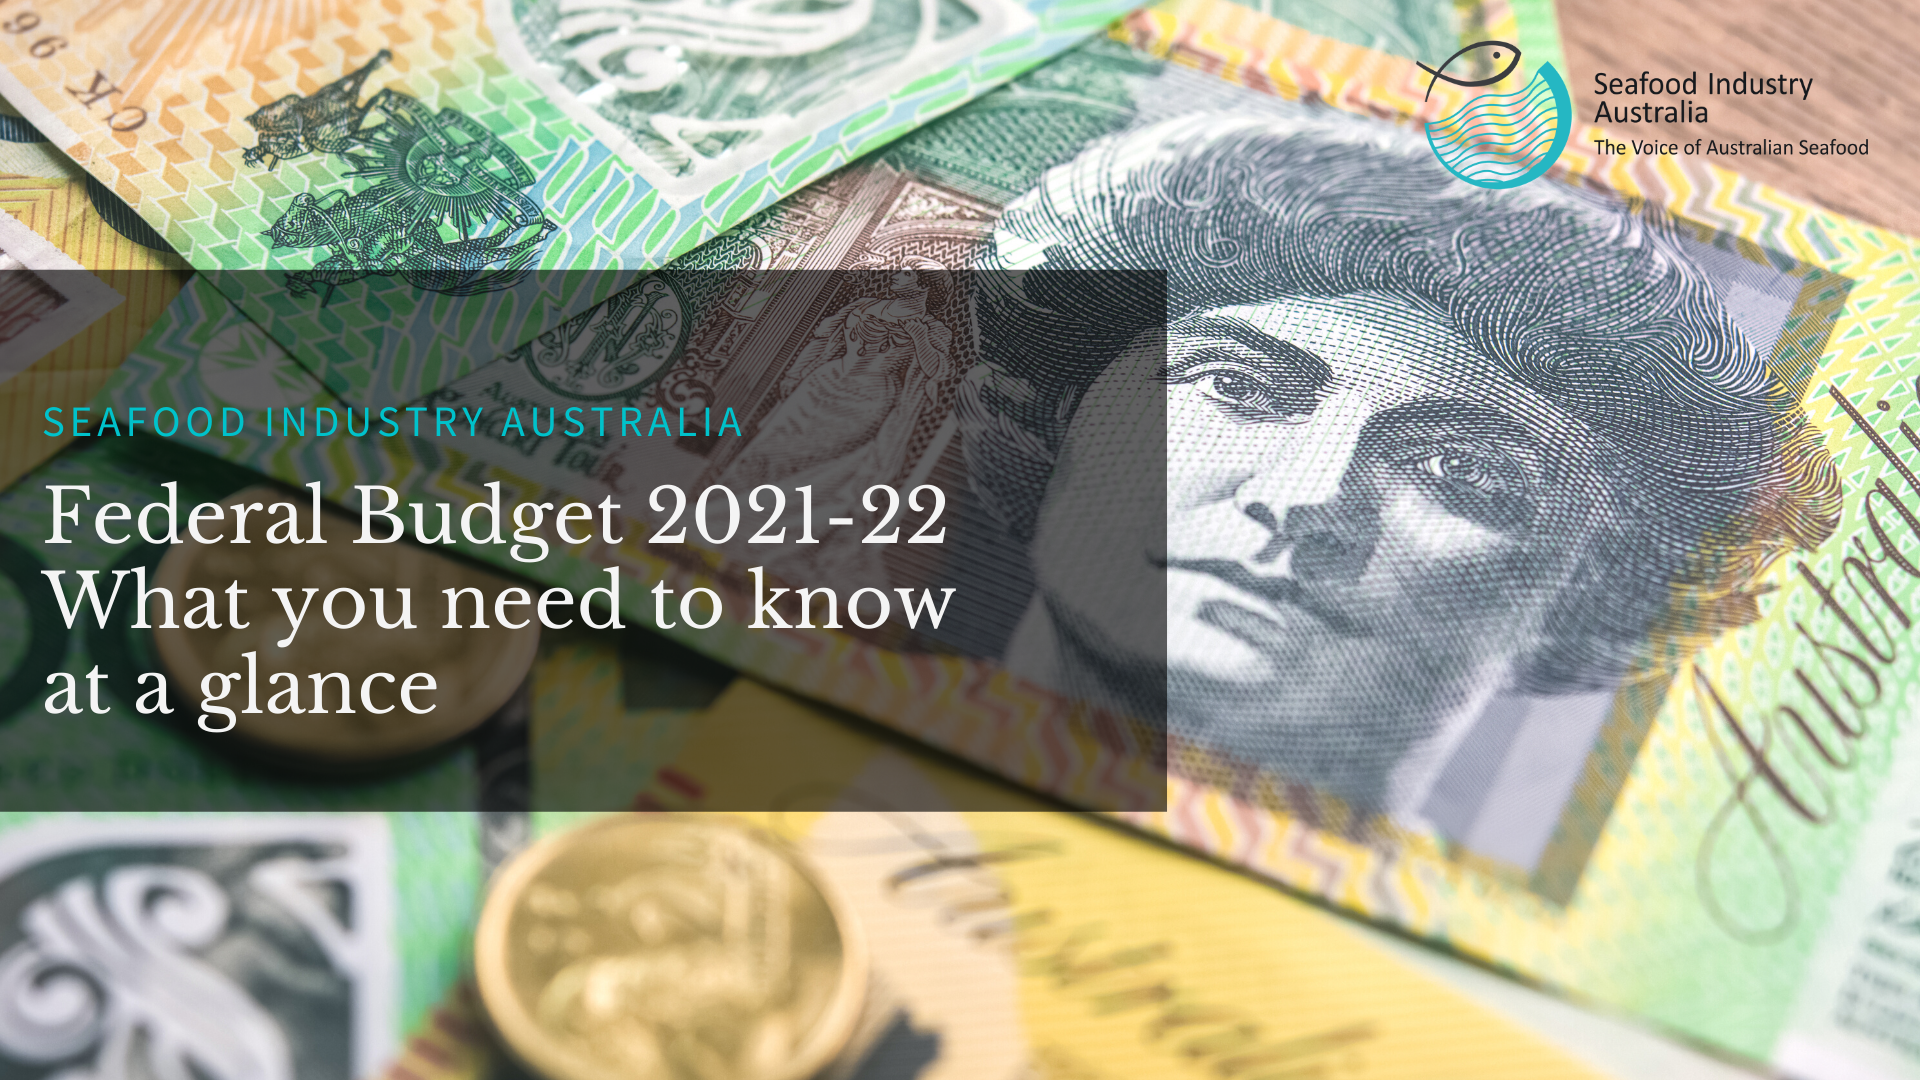 SIA’s guide to the Federal Budget 2021-22 at a glance